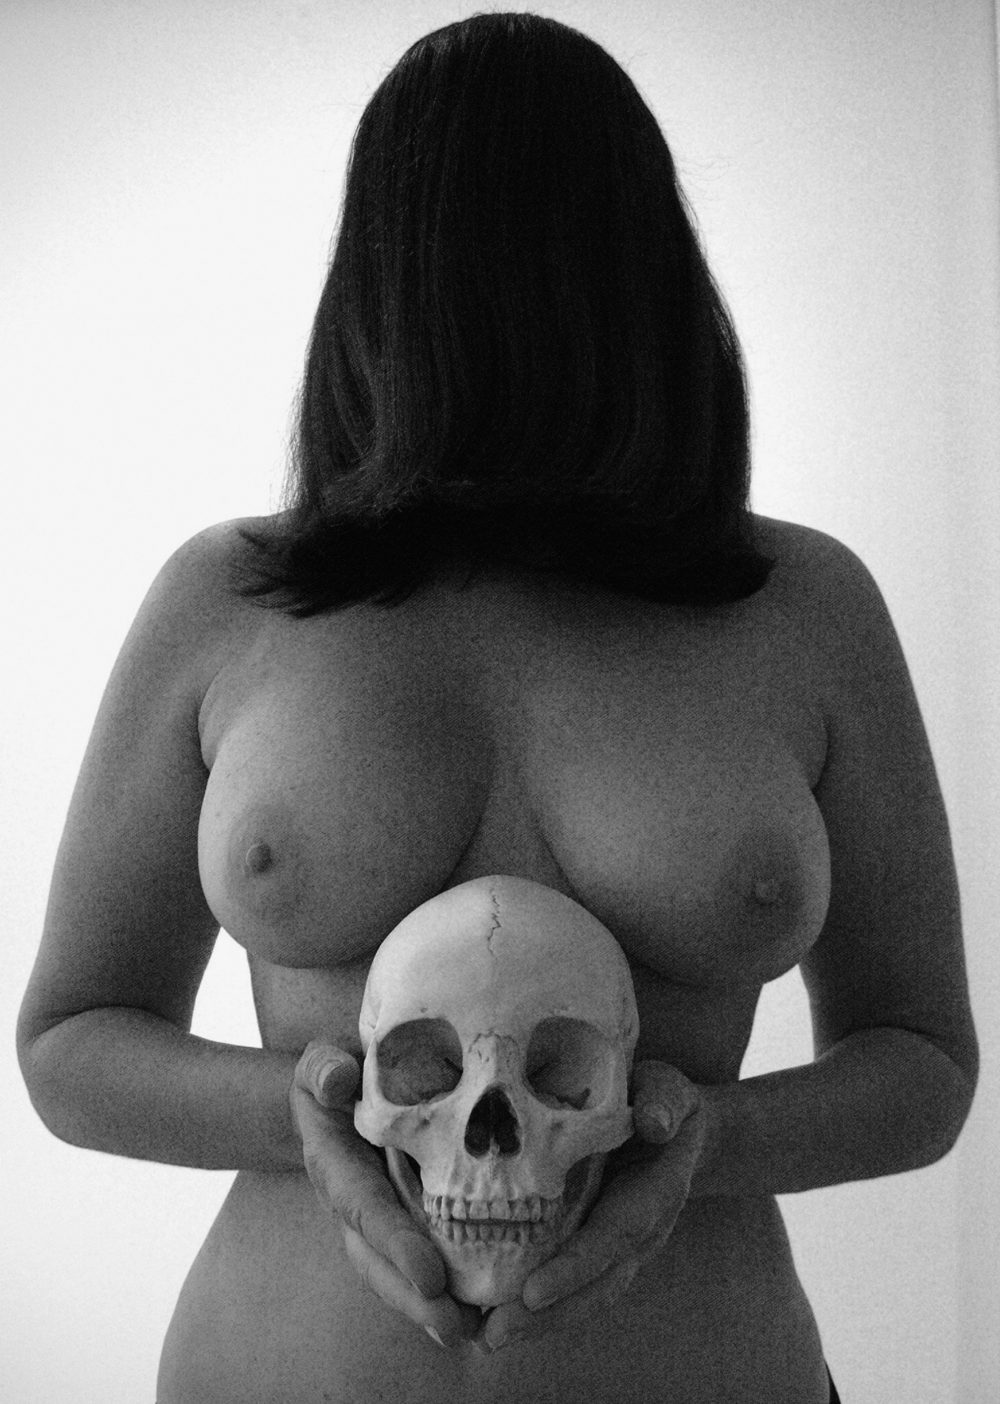 Self Portrait with Skull